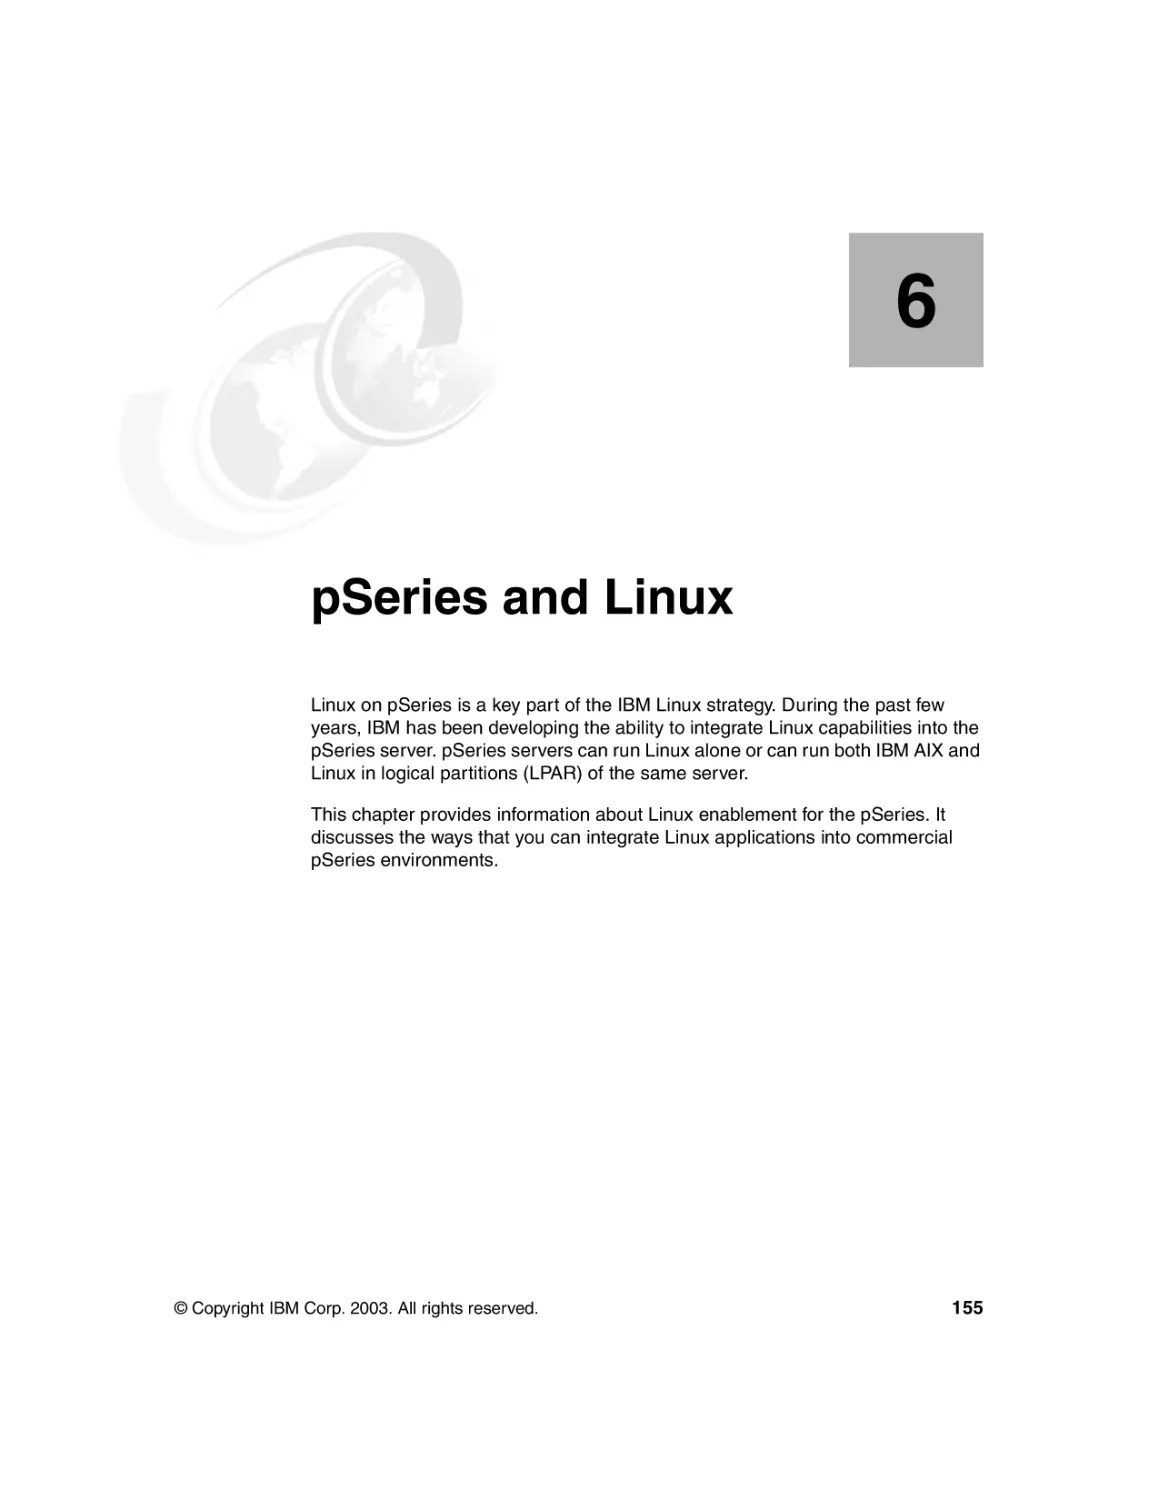 Chapter 6. pSeries and Linux